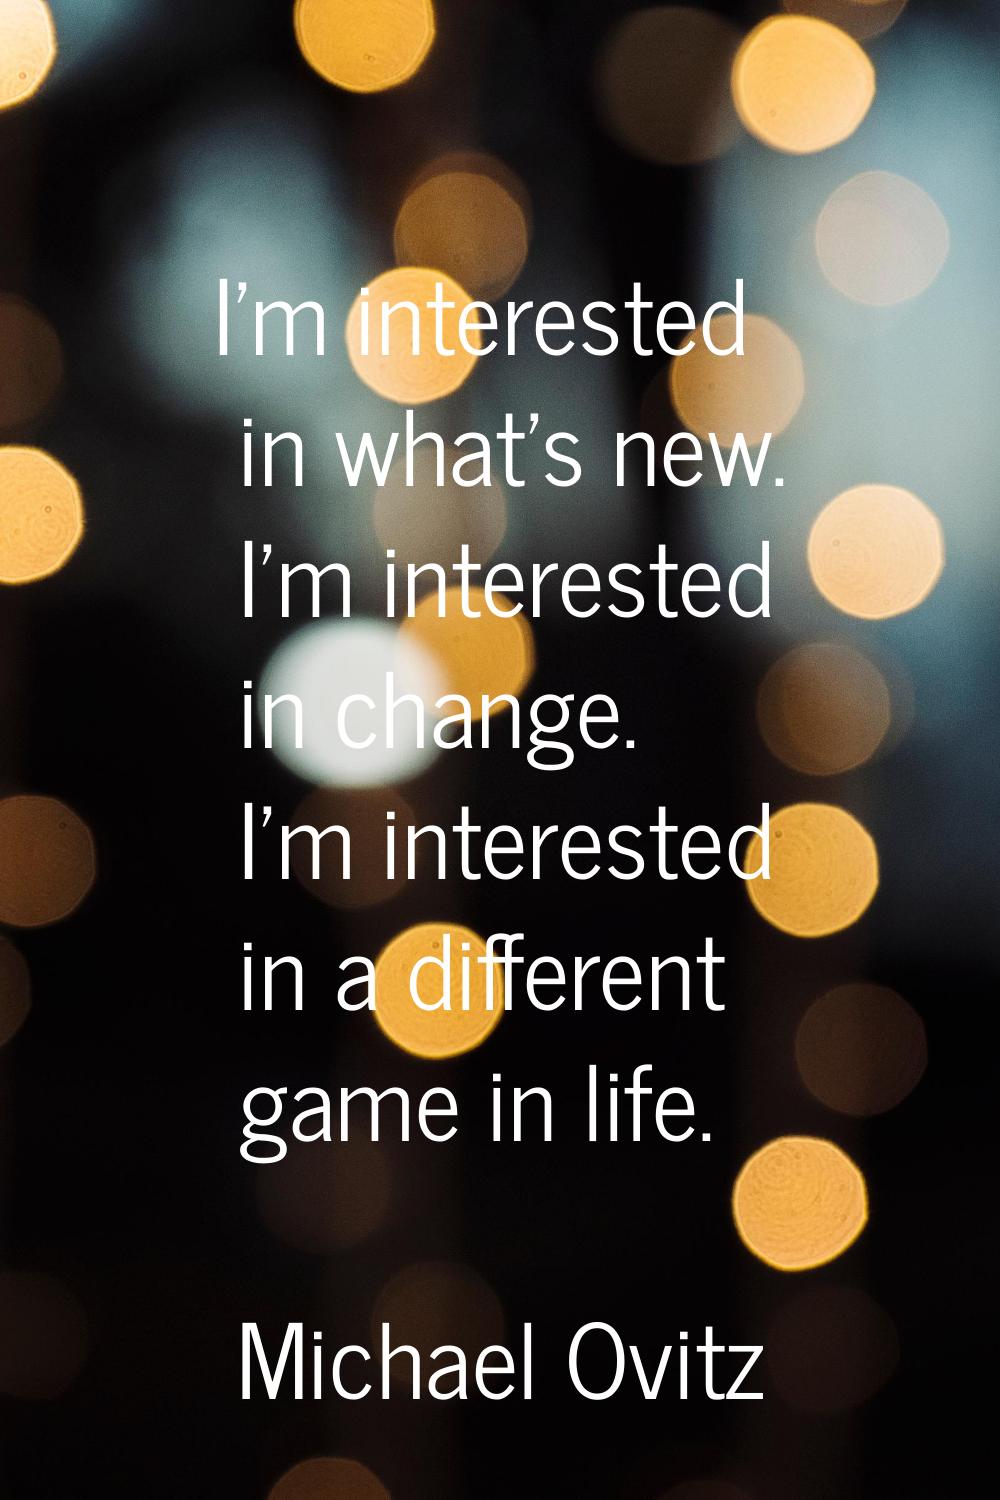 I'm interested in what's new. I'm interested in change. I'm interested in a different game in life.